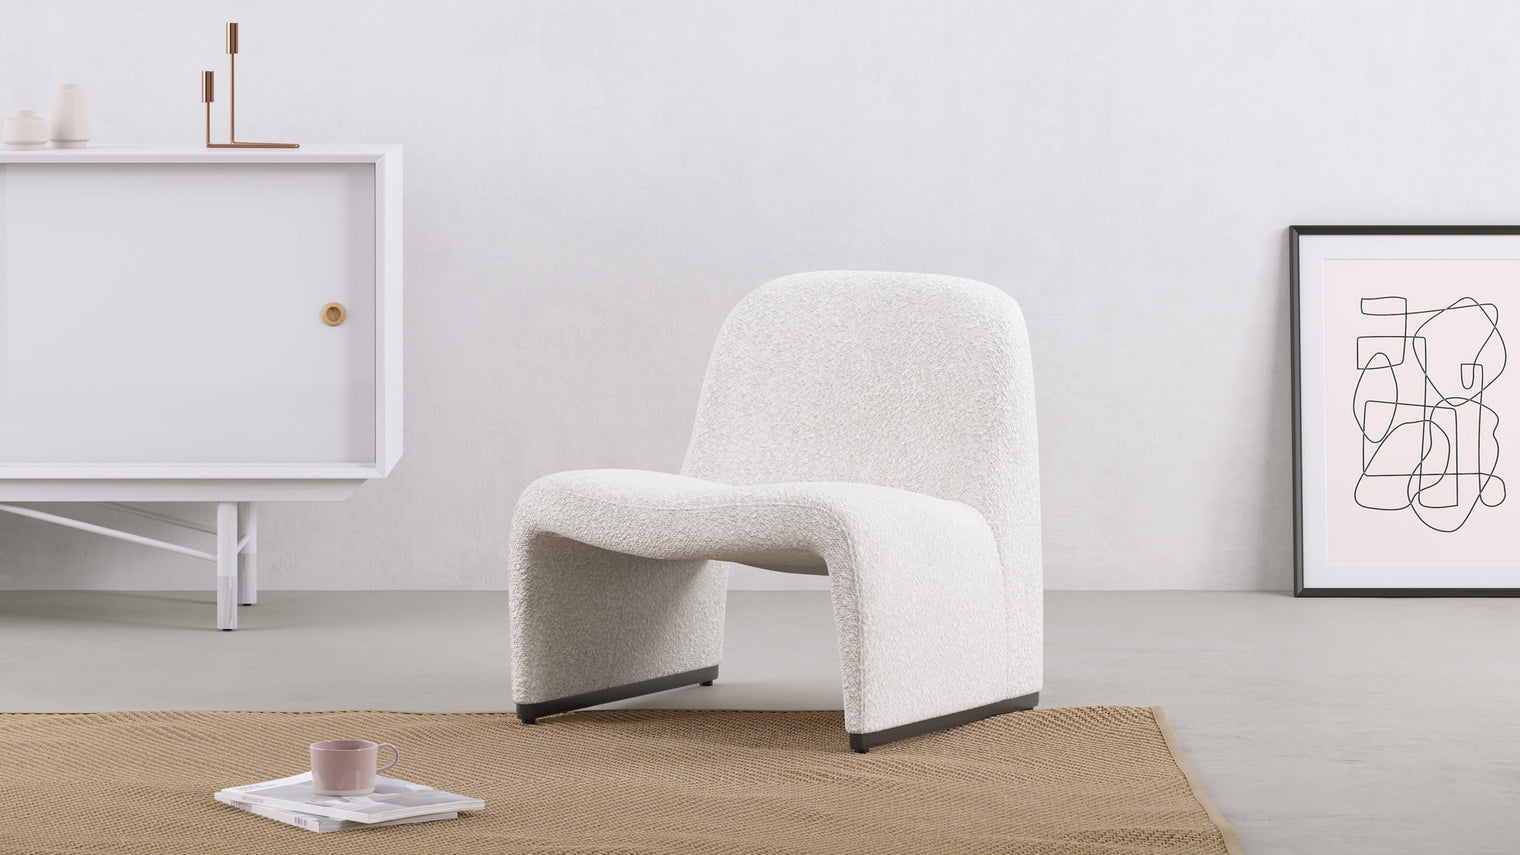 Timeless Design | An undeniable mid-century icon, the popularity of the Alky chair in contemporary interiors is proof that good design transcends time and space. Simple yet striking in design, this elegant lounge chair promises ultimate comfortability without compromising on style.
